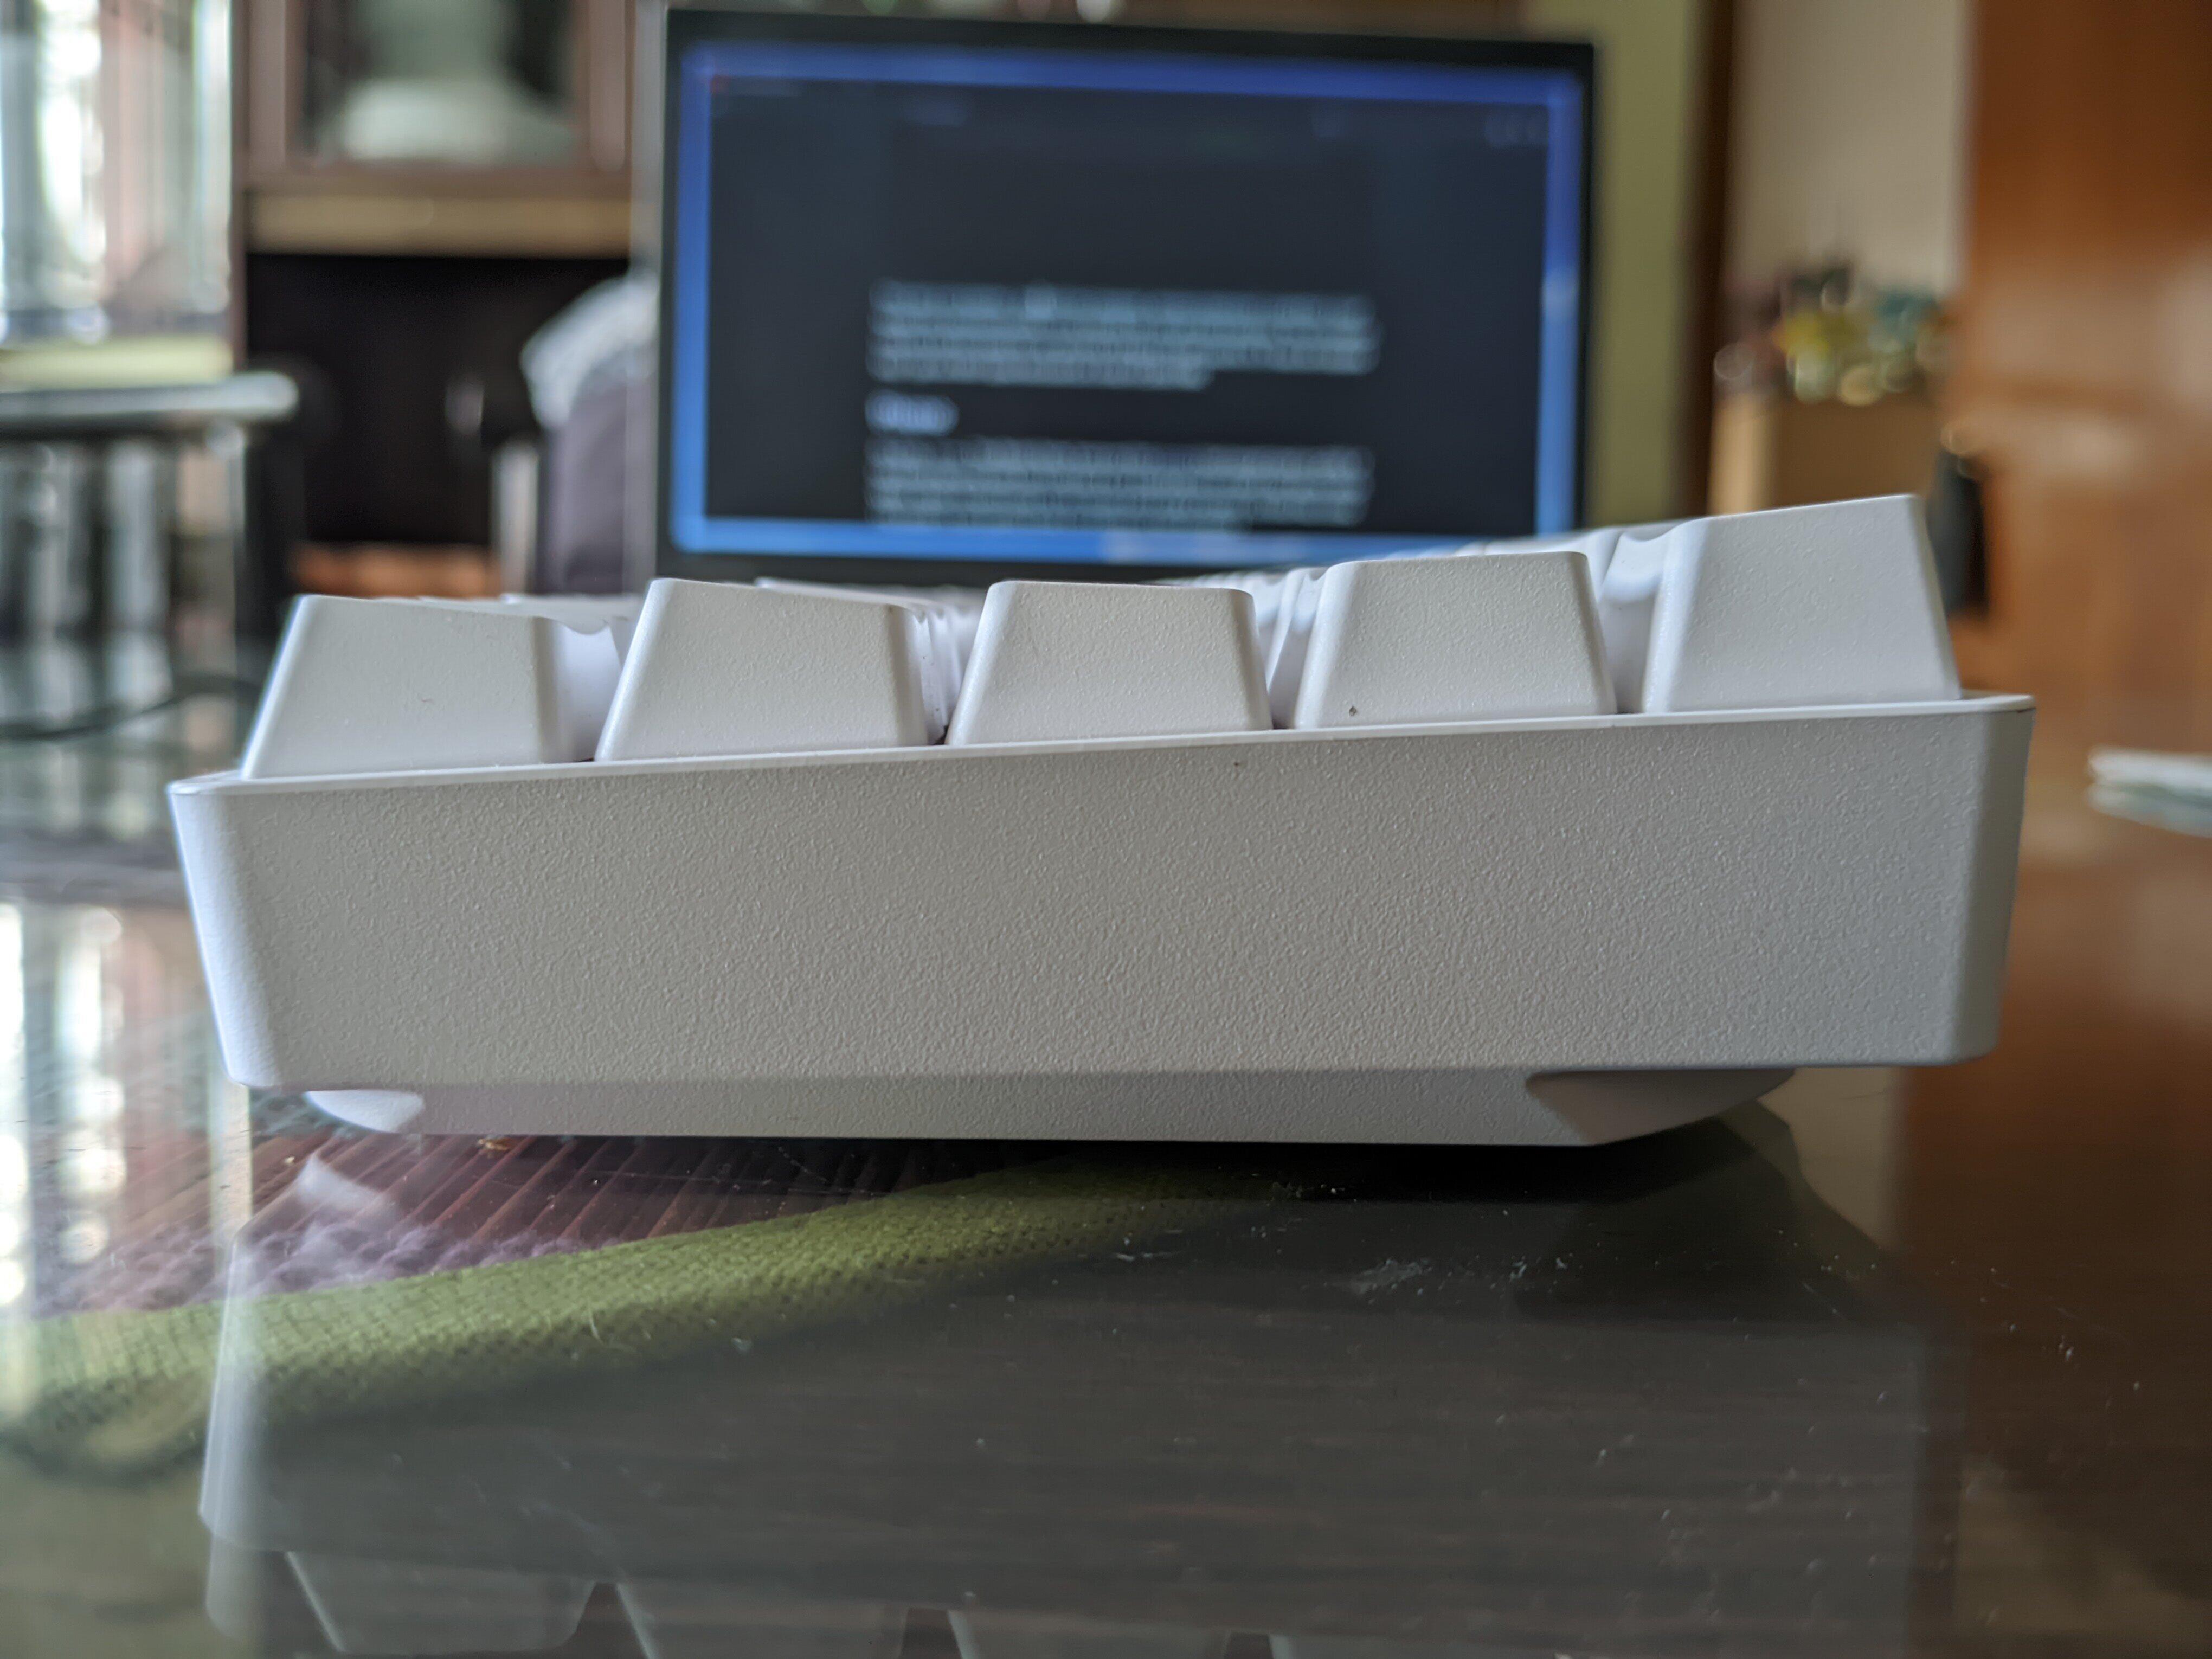 mech-keyboard, view from the side